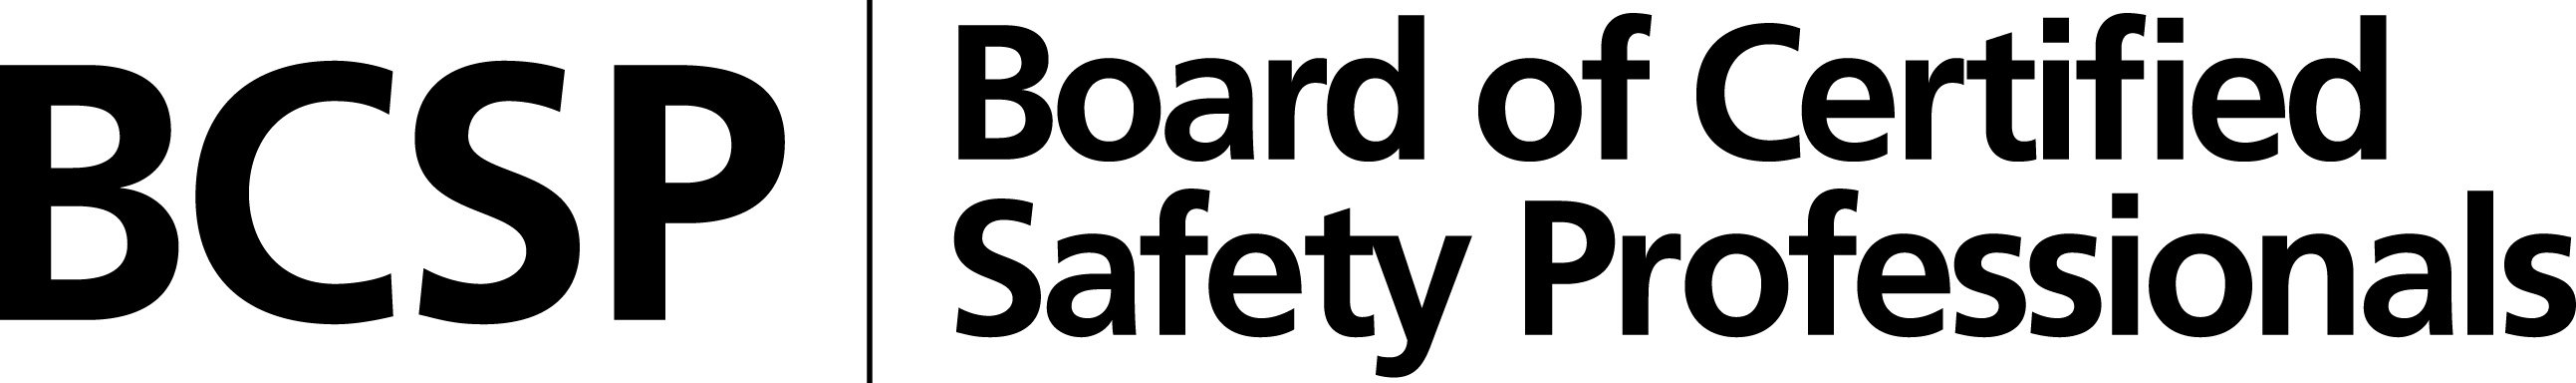 Board of Certified Safety Professionals (BCSP) logo